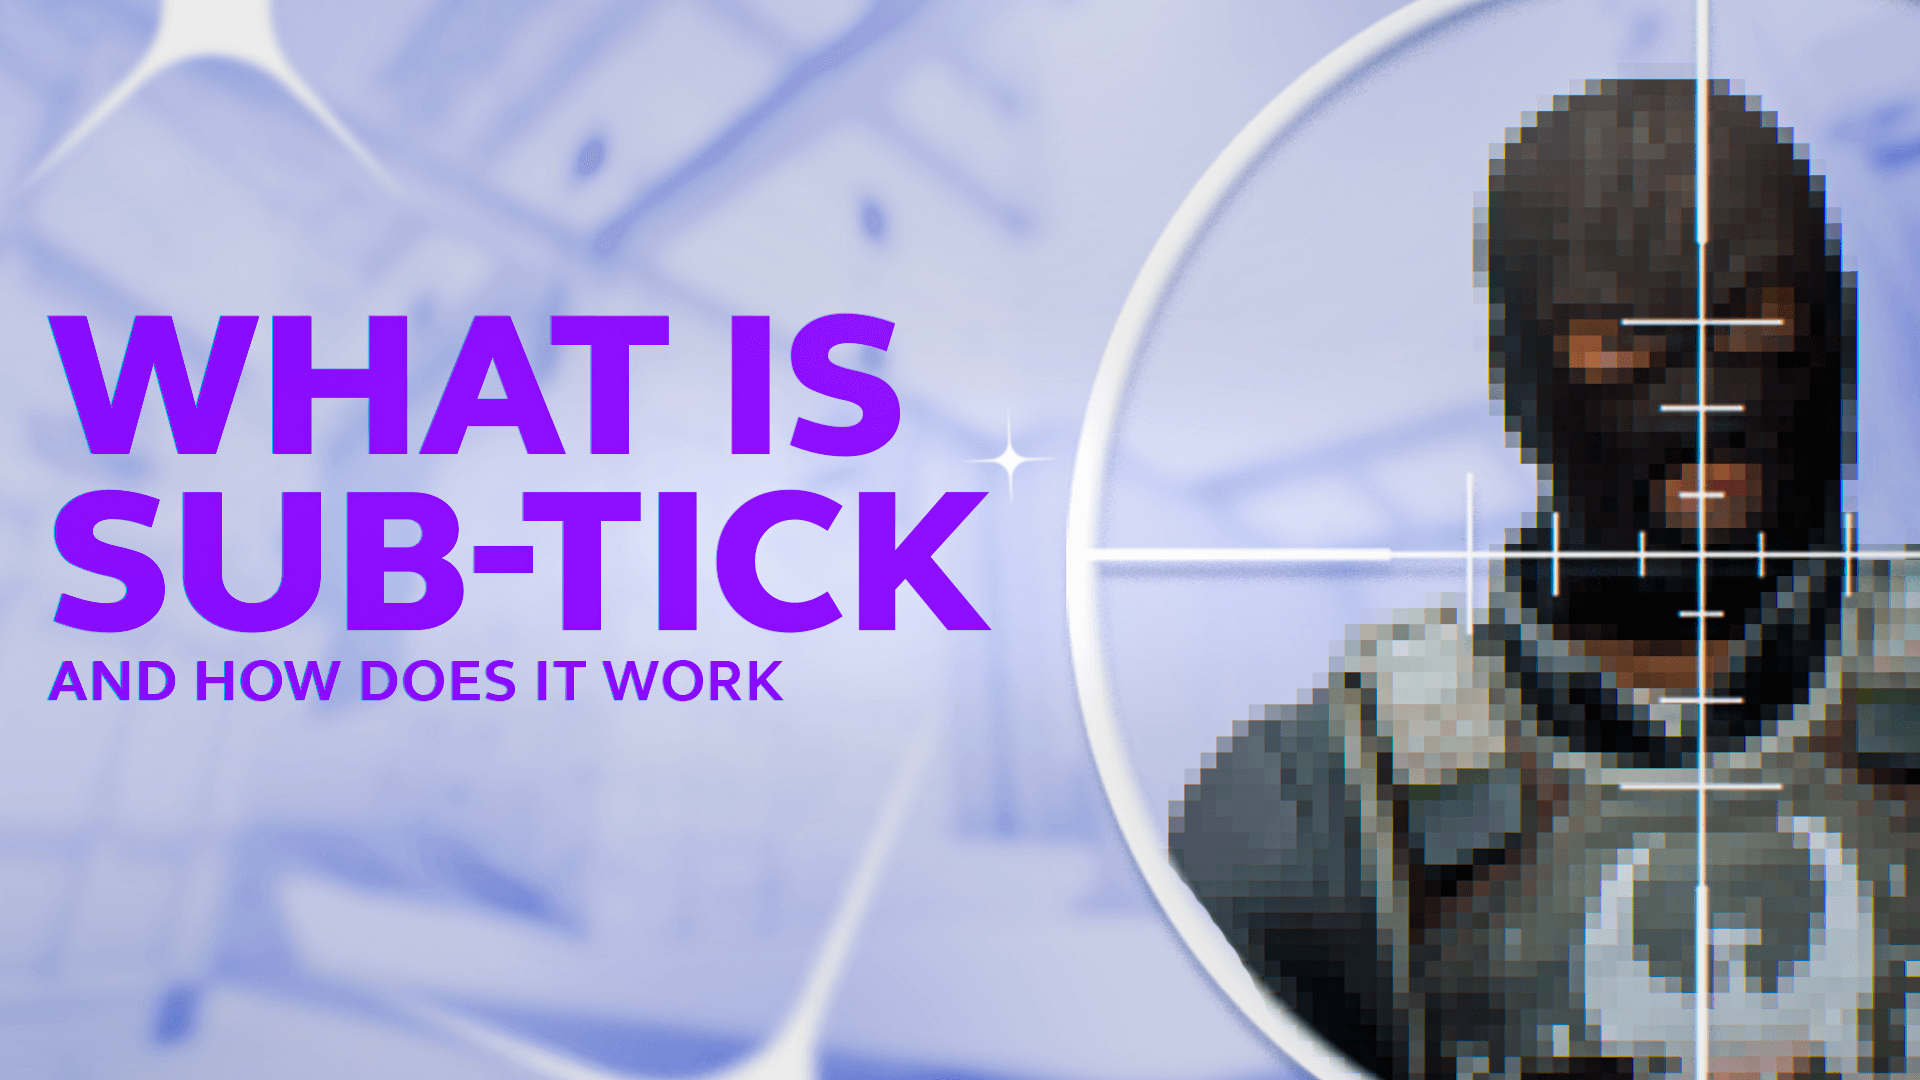 What Is Sub-tick and How Does It Work?